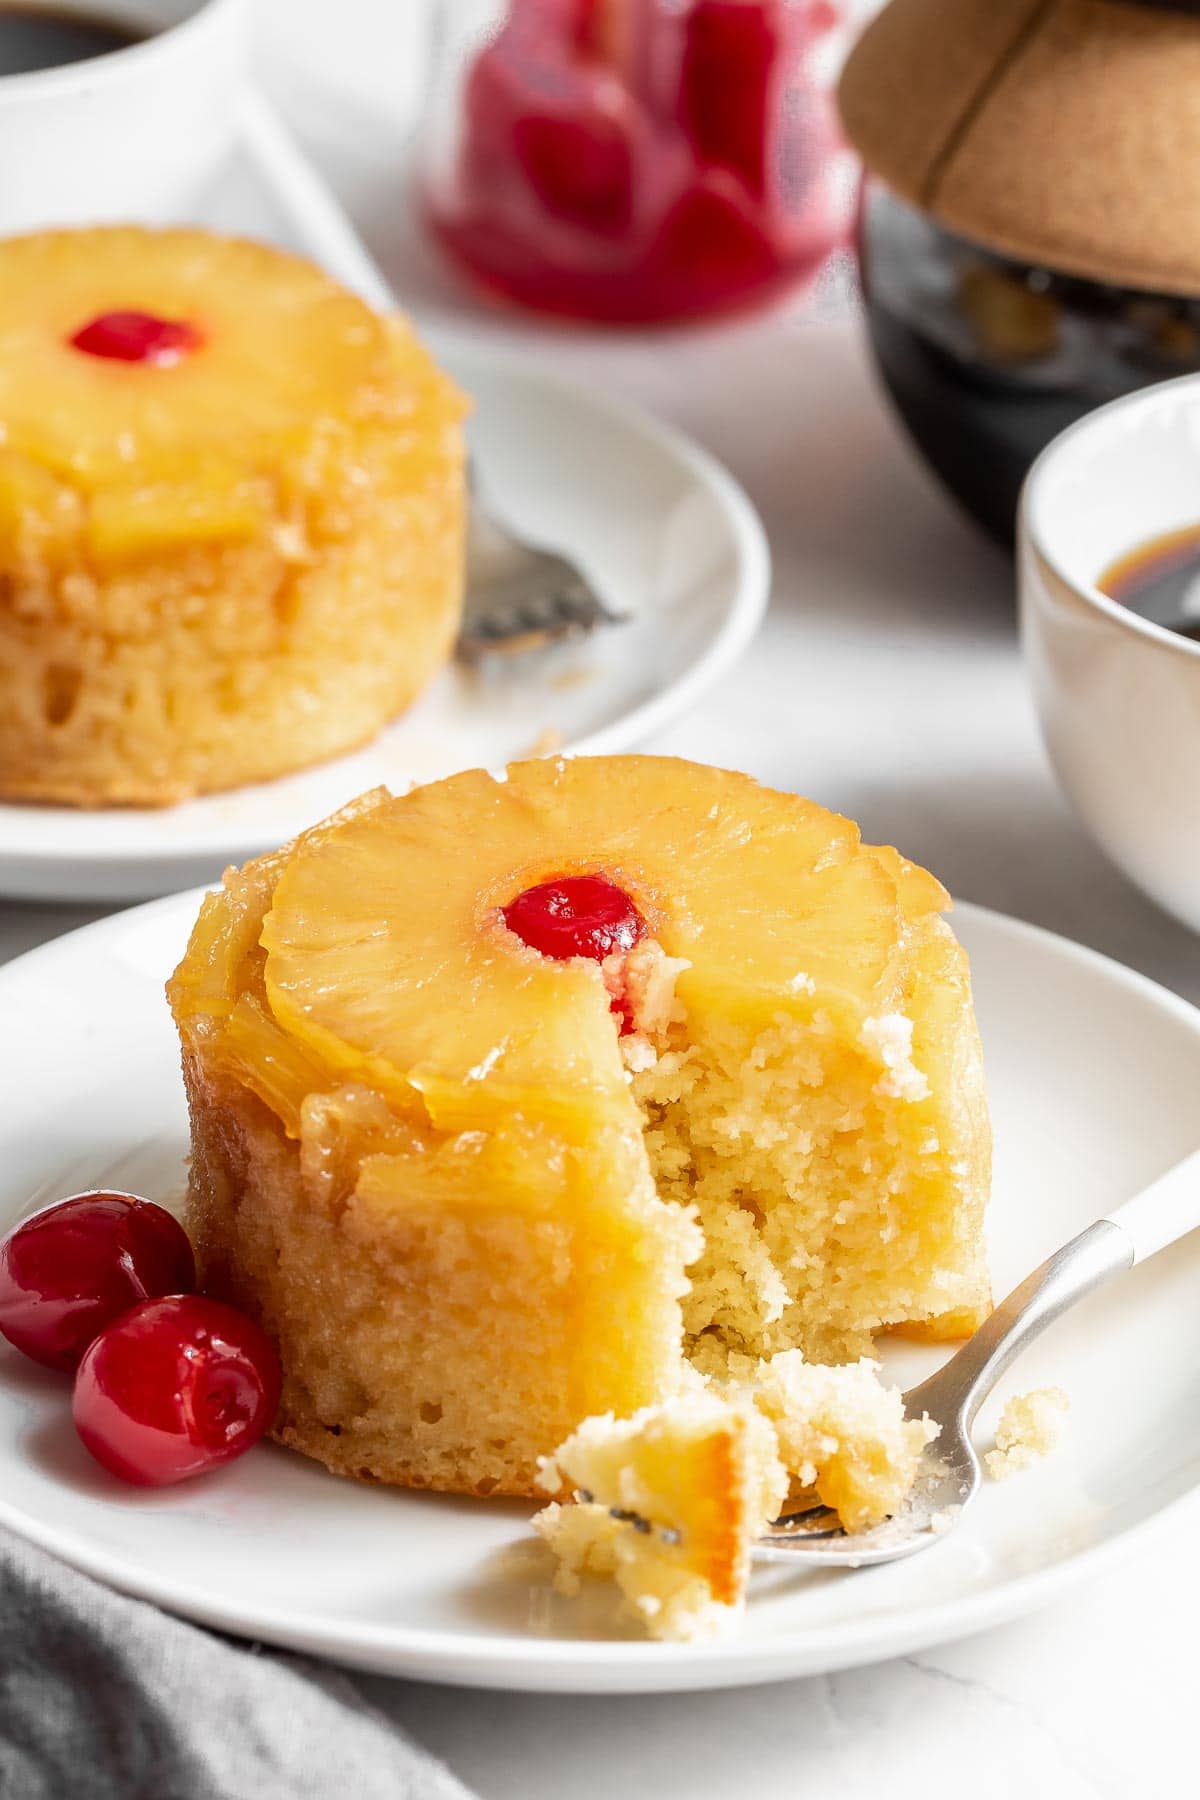 Pineapple upside down cake with fork taking a bite.